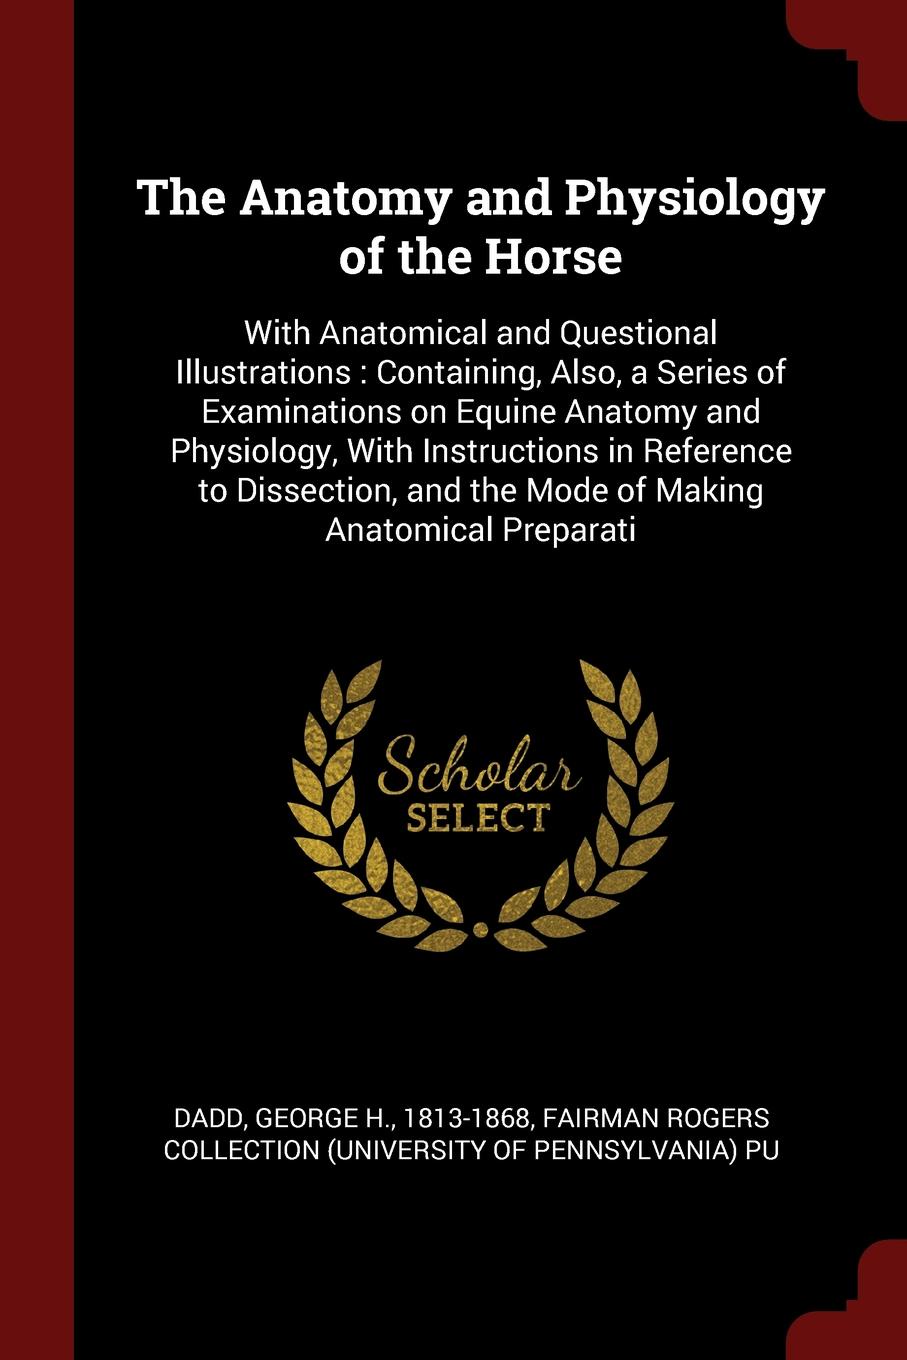 The Anatomy and Physiology of the Horse. With Anatomical and Questional Illustrations : Containing, Also, a Series of Examinations on Equine Anatomy and Physiology, With Instructions in Reference to Dissection, and the Mode of Making Anatomical Pr...